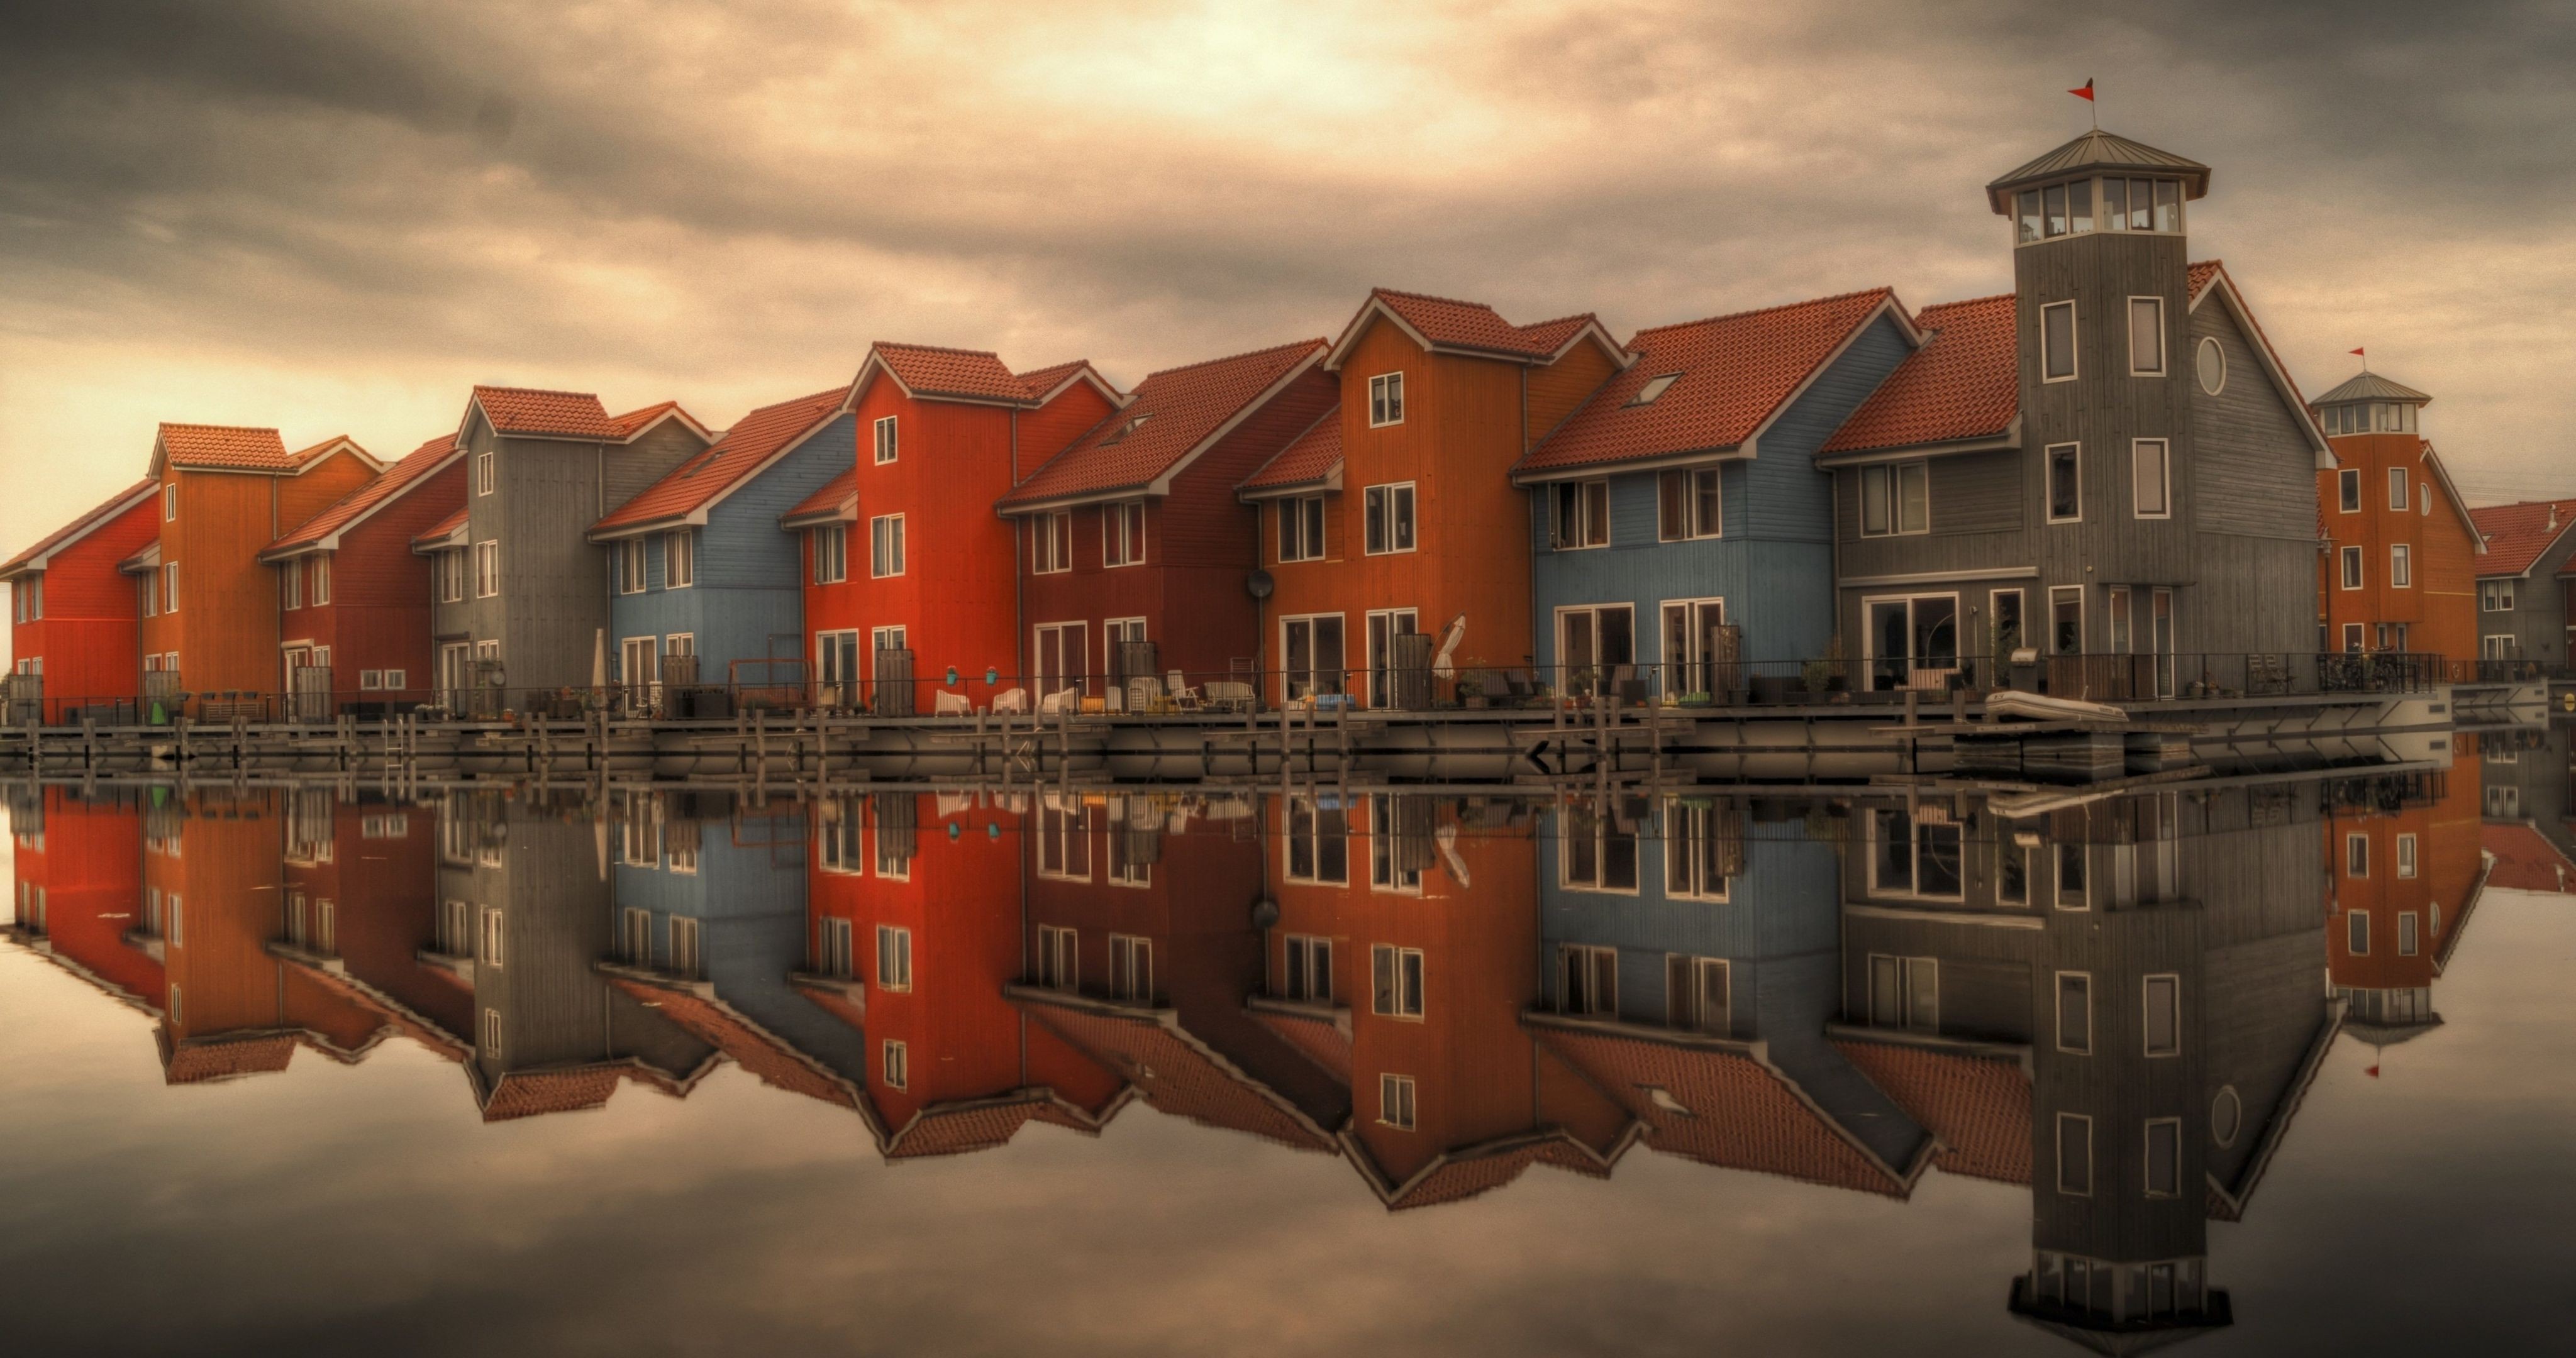 General 4096x2160 house reflection architecture